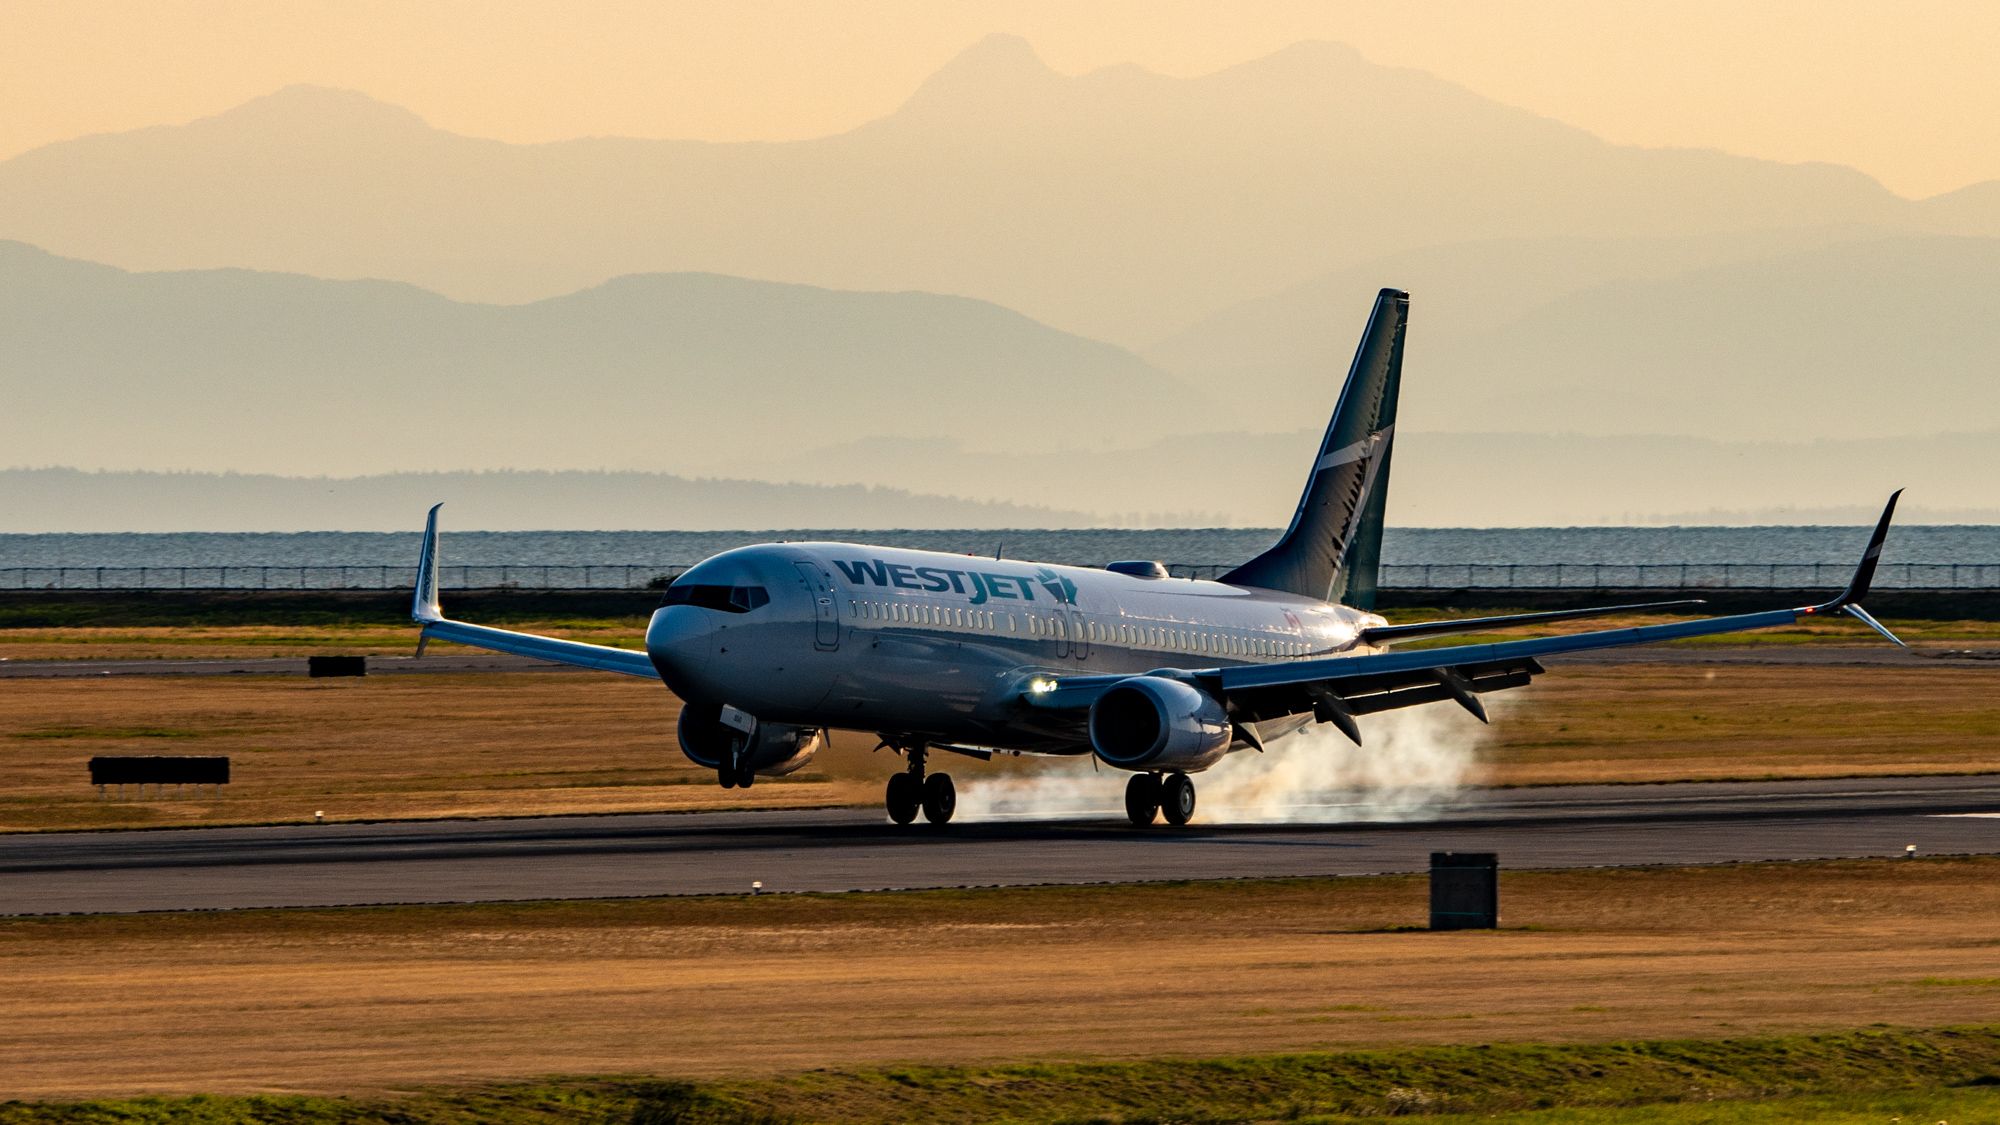 WestJet Boeing 737-800 touching down at Vancouver International Airport.